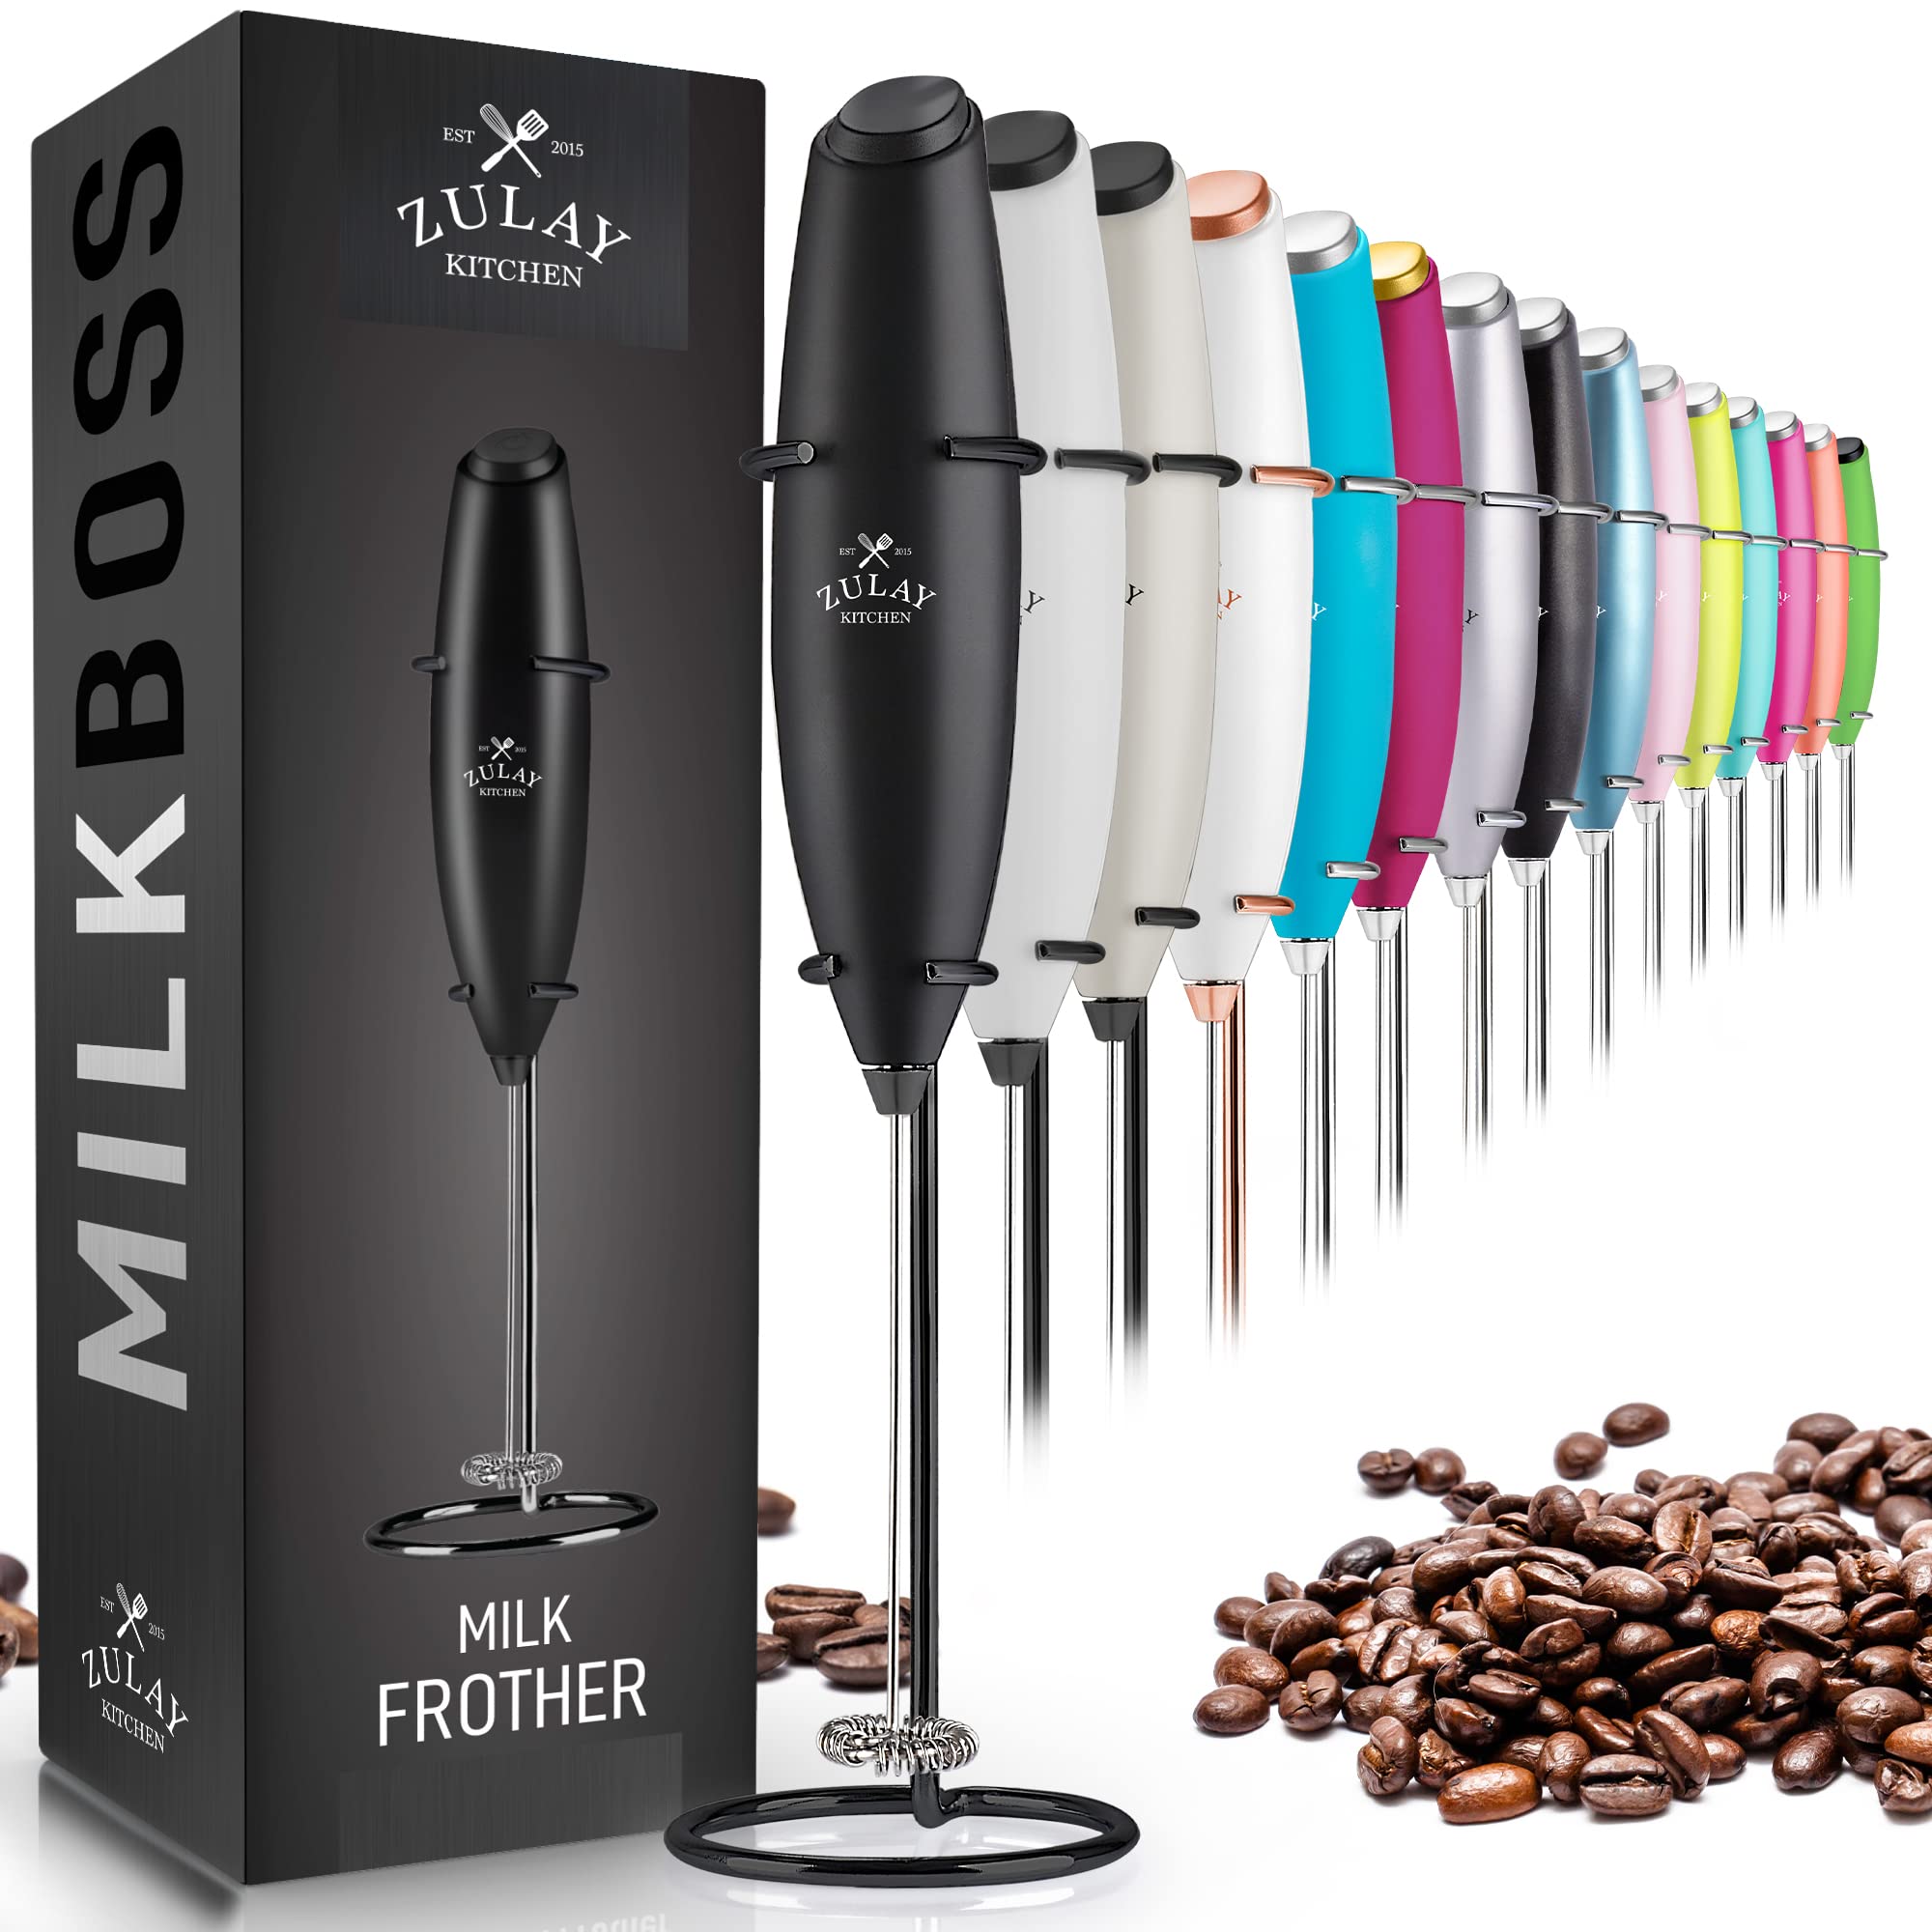 Zulay Kitchen MILK BOSS Milk Frother With Stand - Gray, 1 - Foods Co.